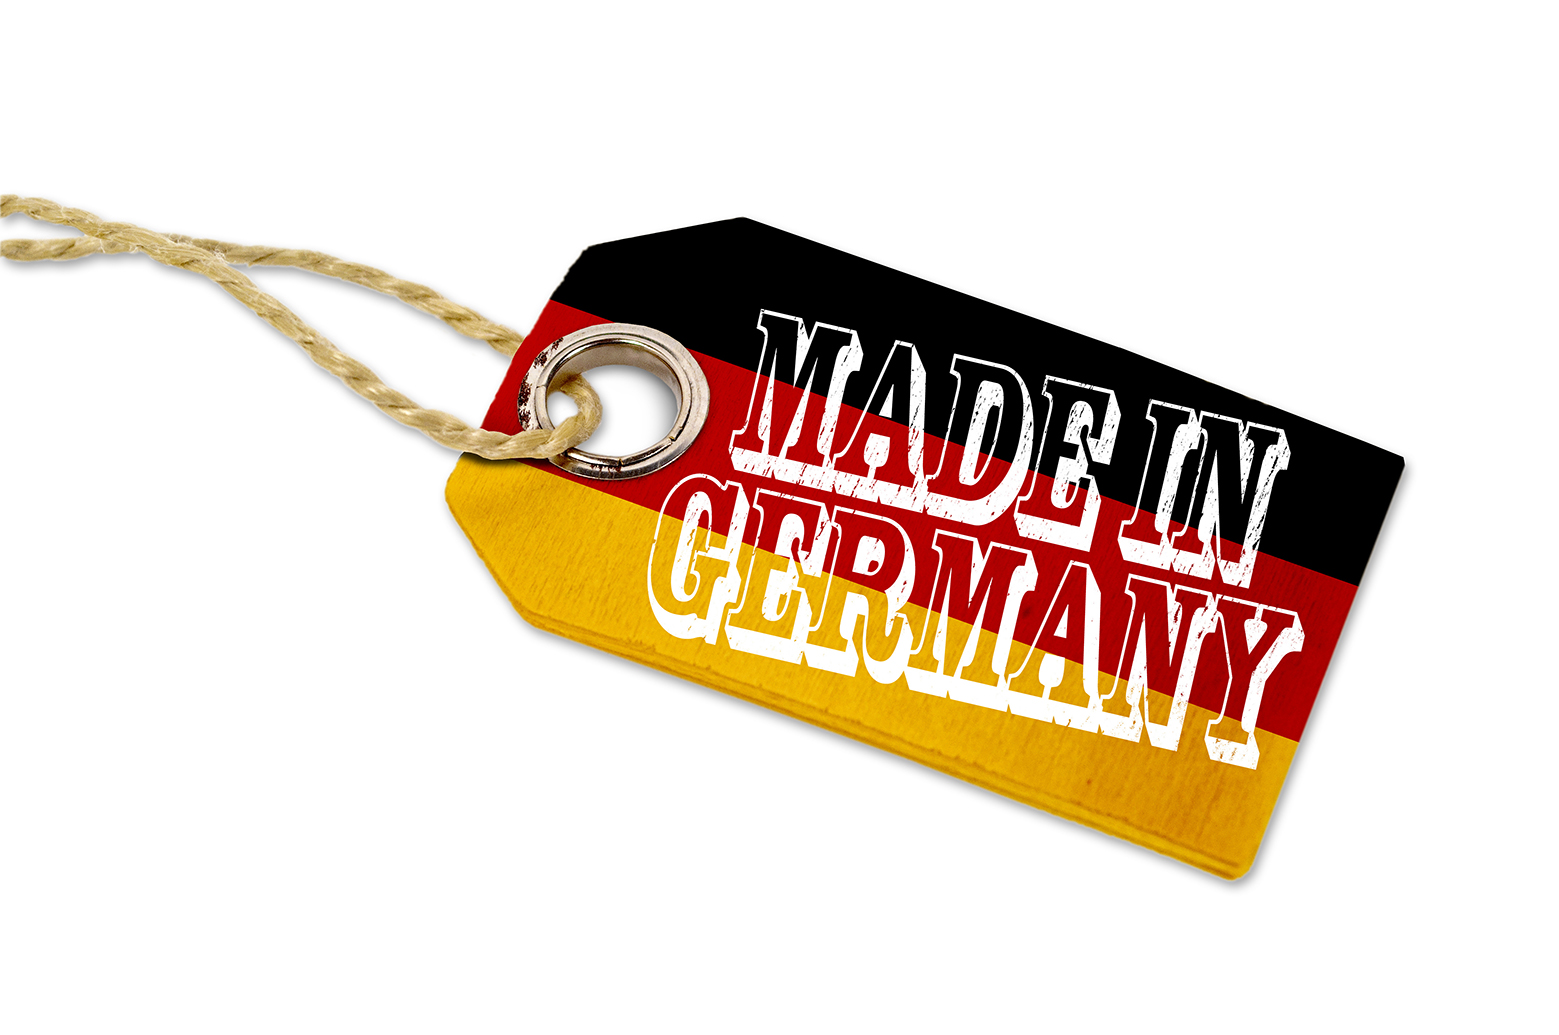 Anhänger mit MADE IN GERMANY